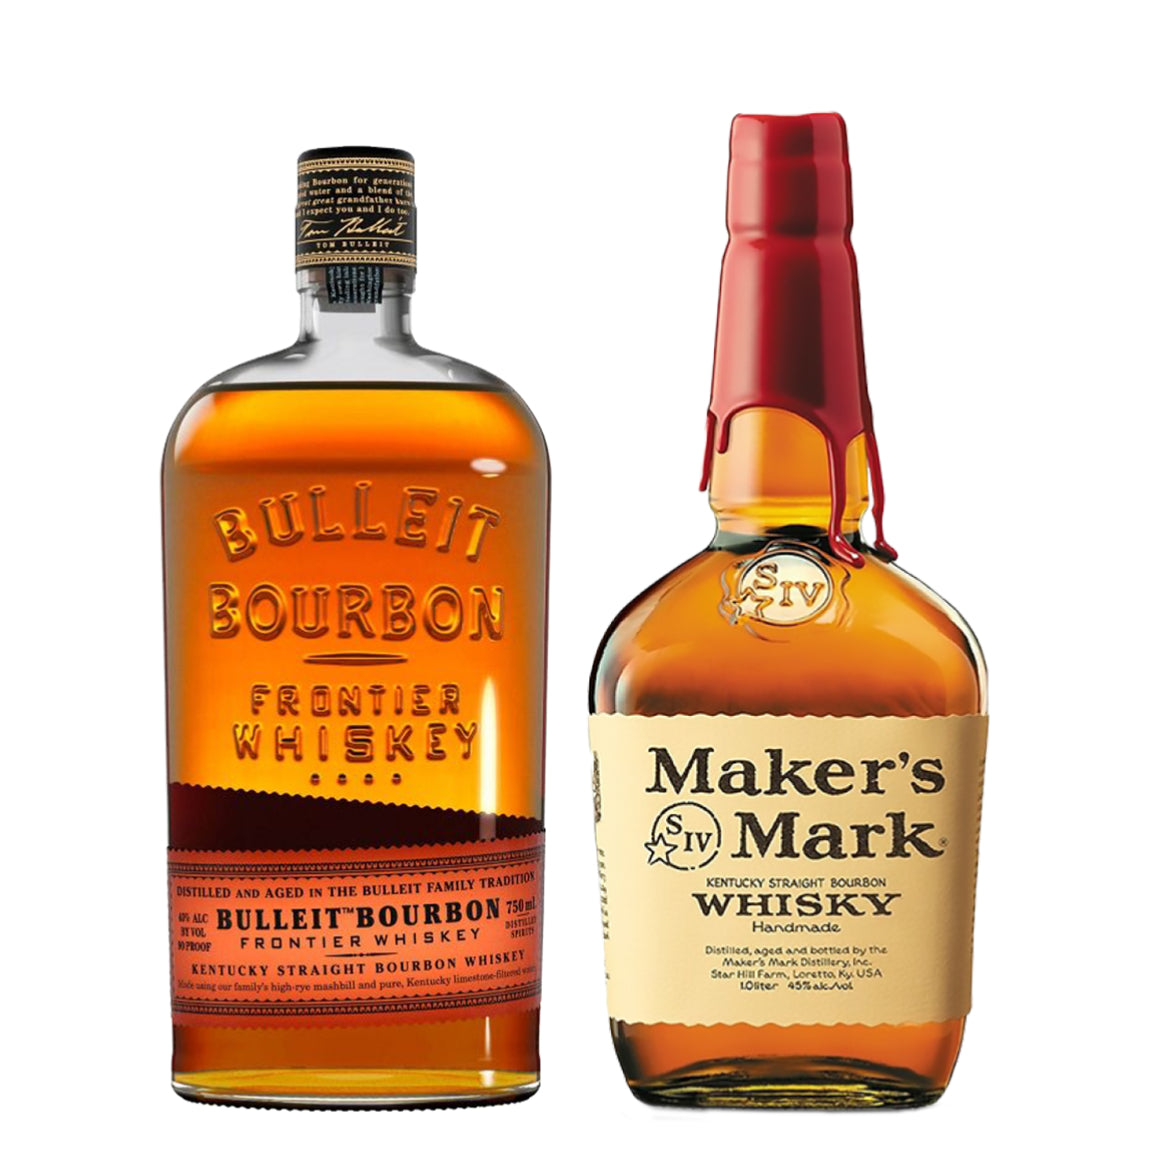 Makers Mark French Oaked Cocktail Set